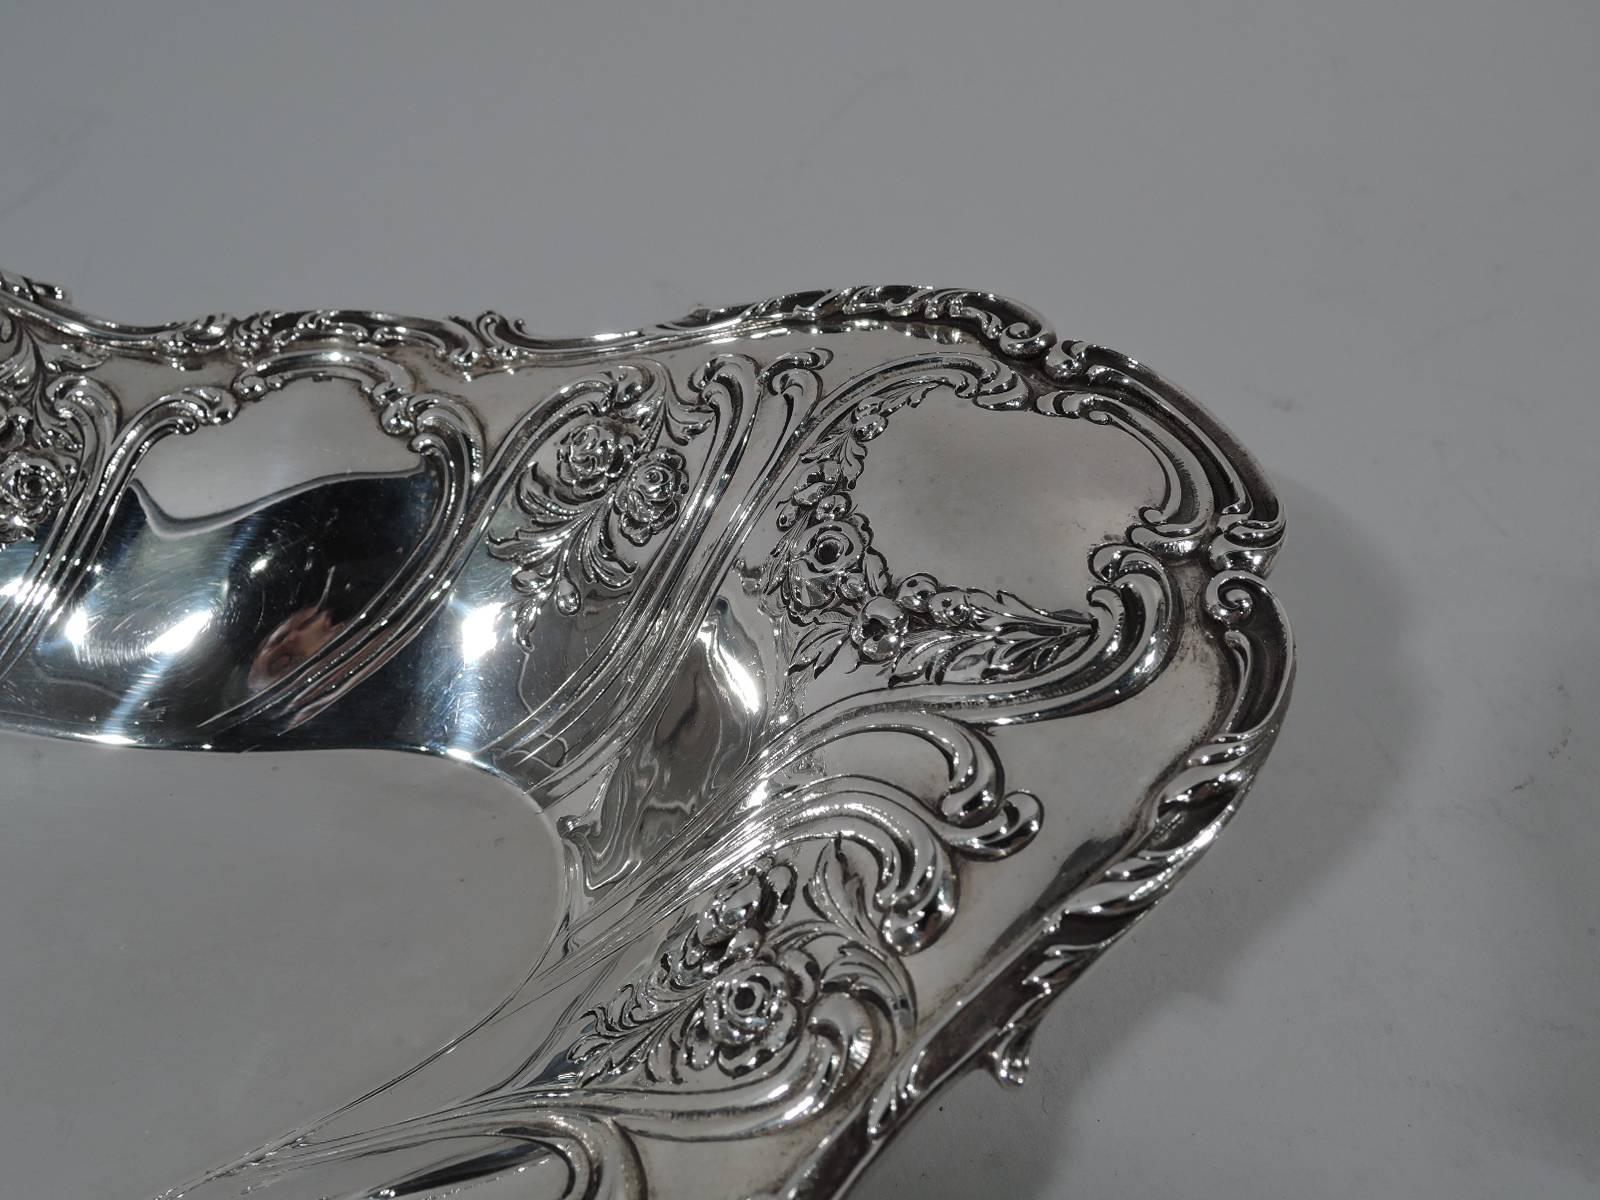 Pretty sterling silver bread tray. Made by Gorham in Providence. Elongated and shaped oval well. Tapering and asymmetrical sides with chased and repousse scrolls, scallop shells, and flowers. Rim has applied scrolls. Hallmark includes no. 593.